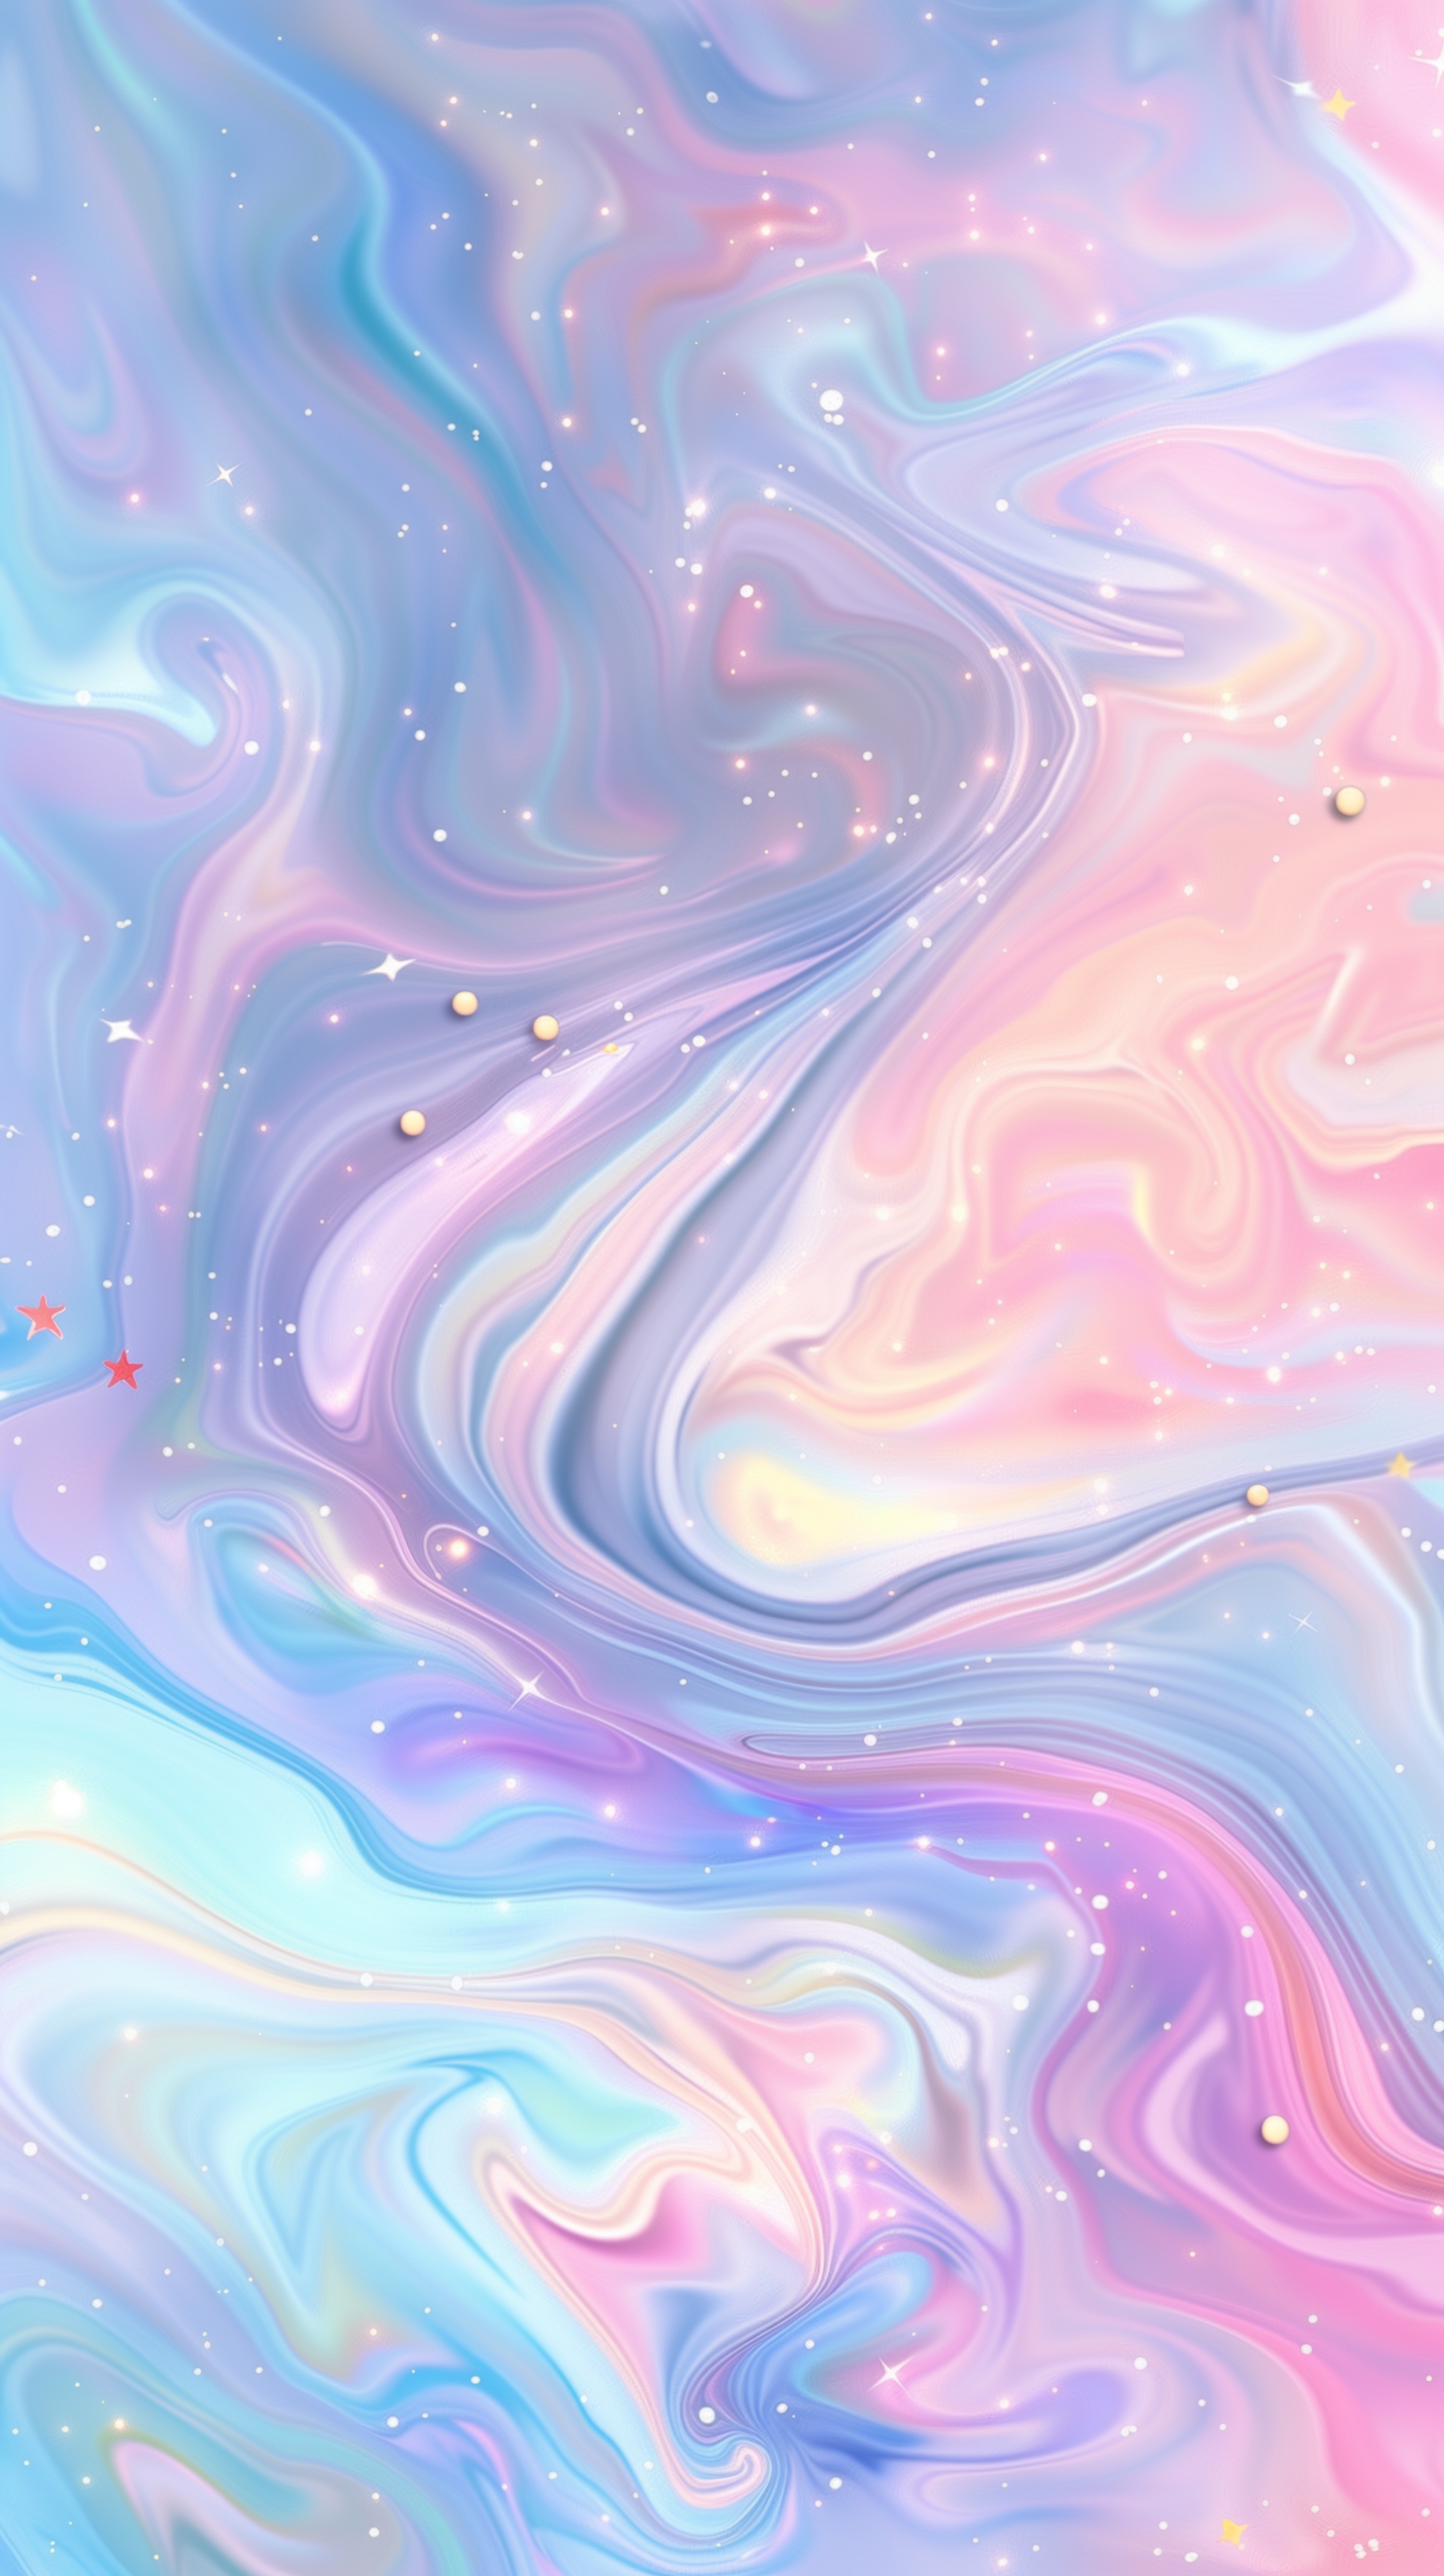 Swirling Pastel Galaxy with Stars Behang[58935a042c3f47169f40]